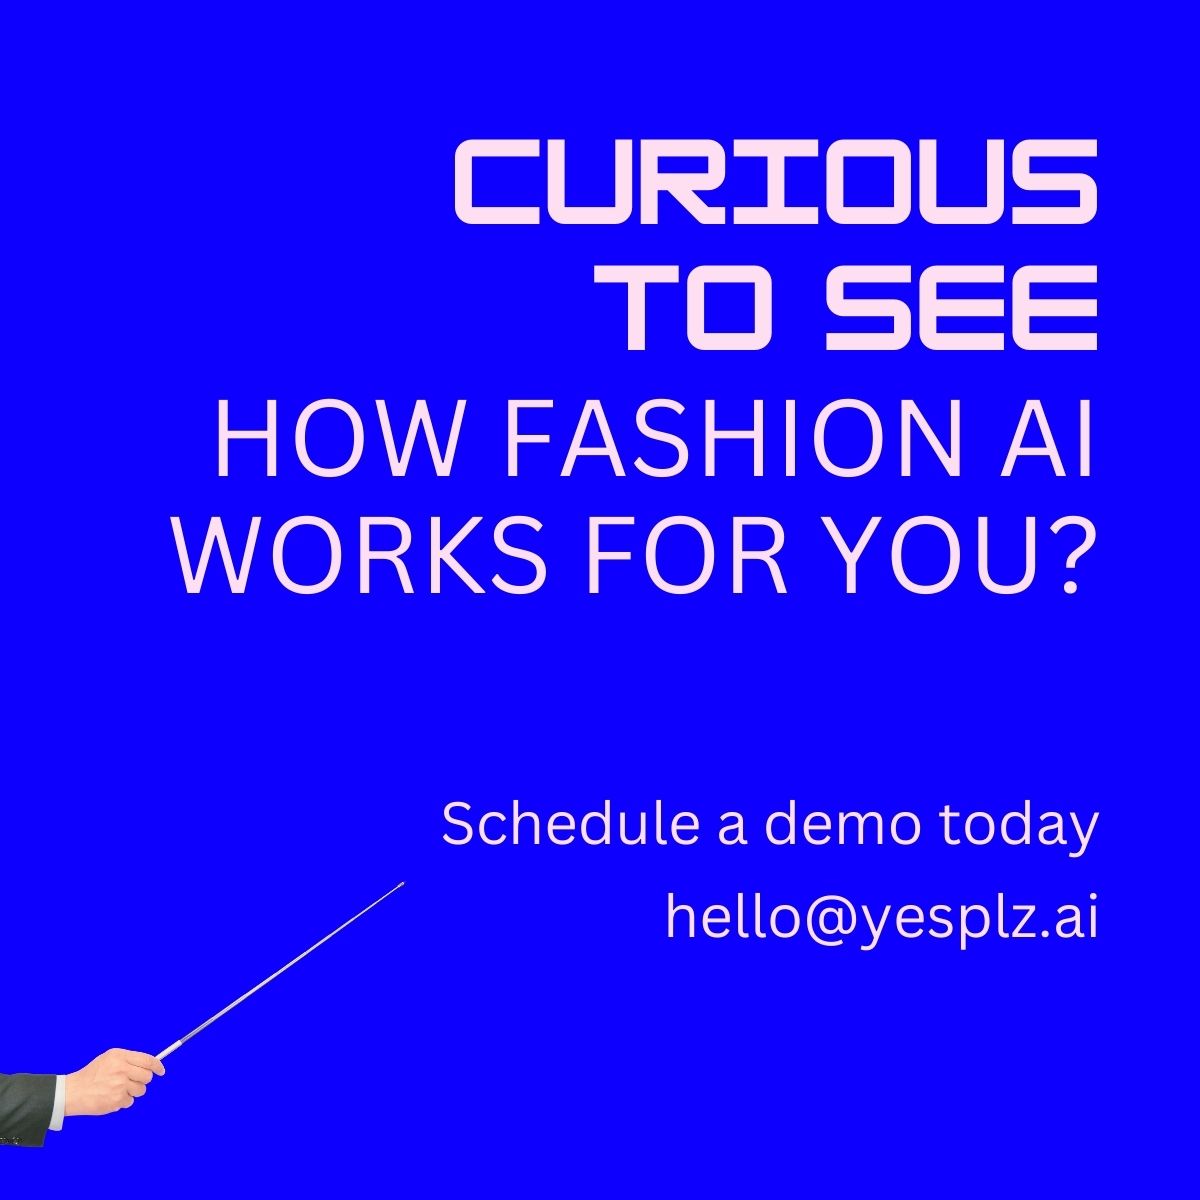 Contact us to learn more about fashion AI